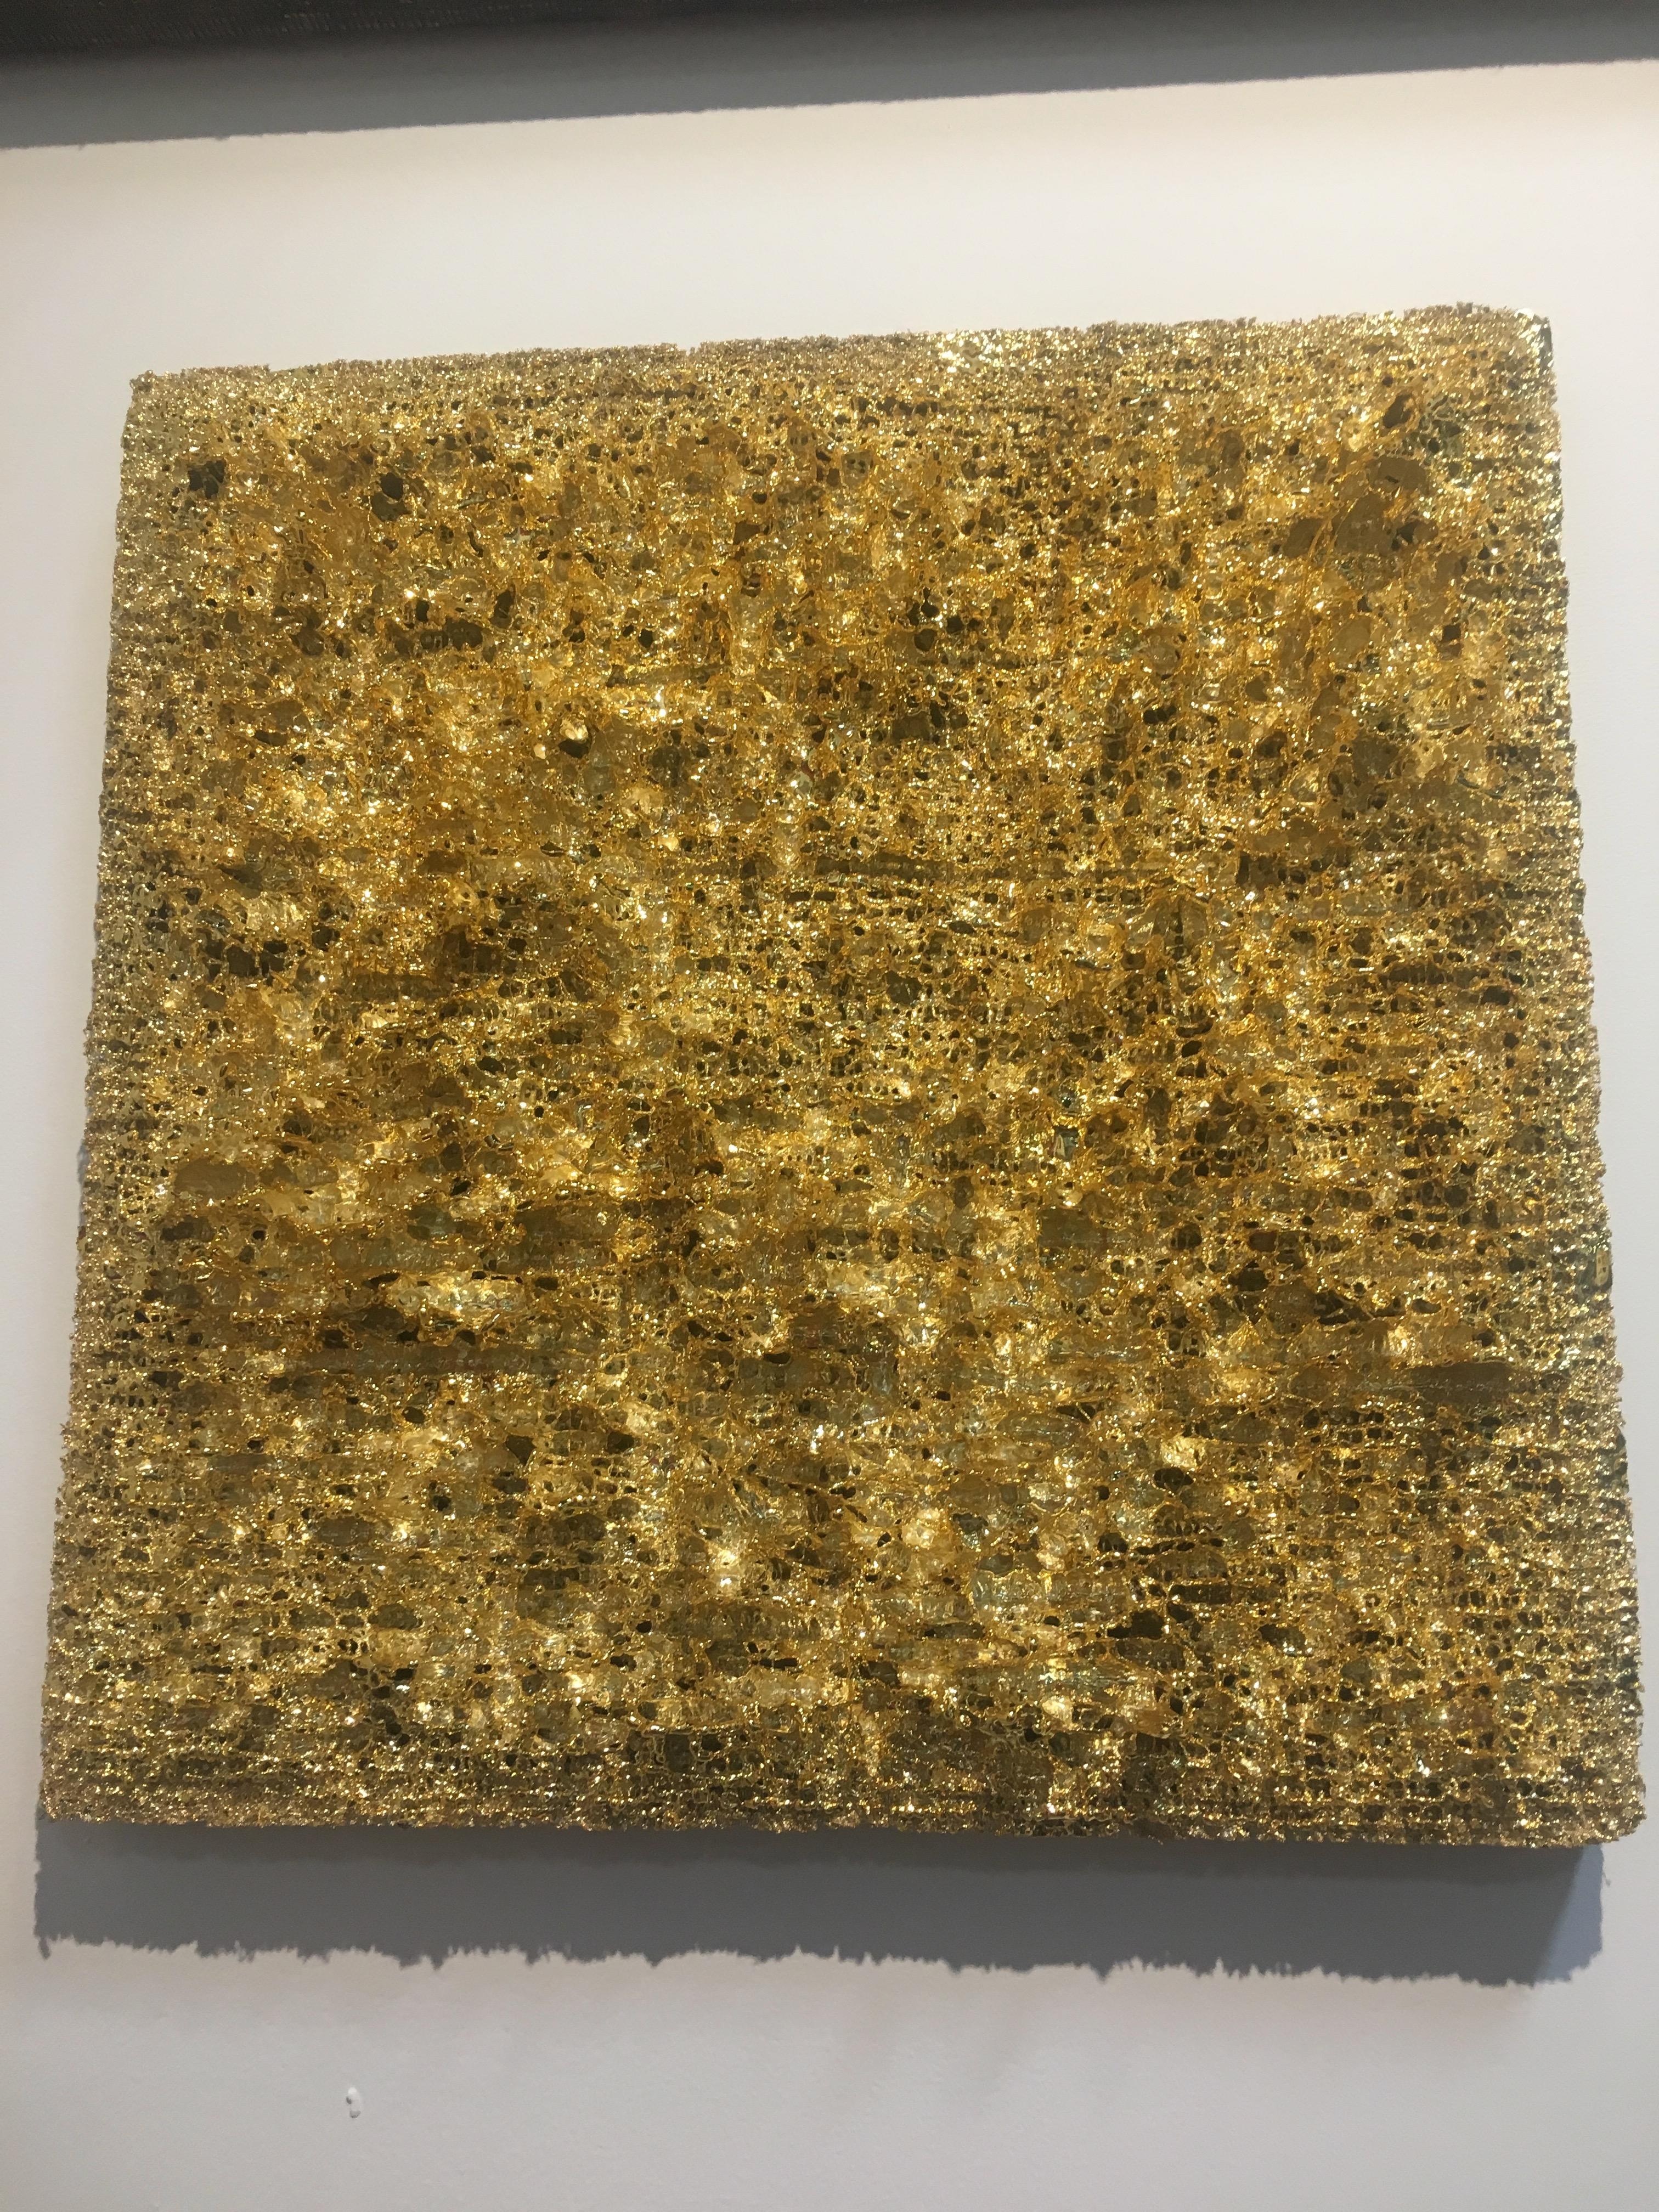 Abstract art, contemporary minimalist, real gold, 24k gold. 
Gold Plating on Burlap, canvas stitching, signed on the back. 
Eduardo Terranova, Colombian artist. 
Artist's studio practice investigates the reflection of metals as optical phenomena and